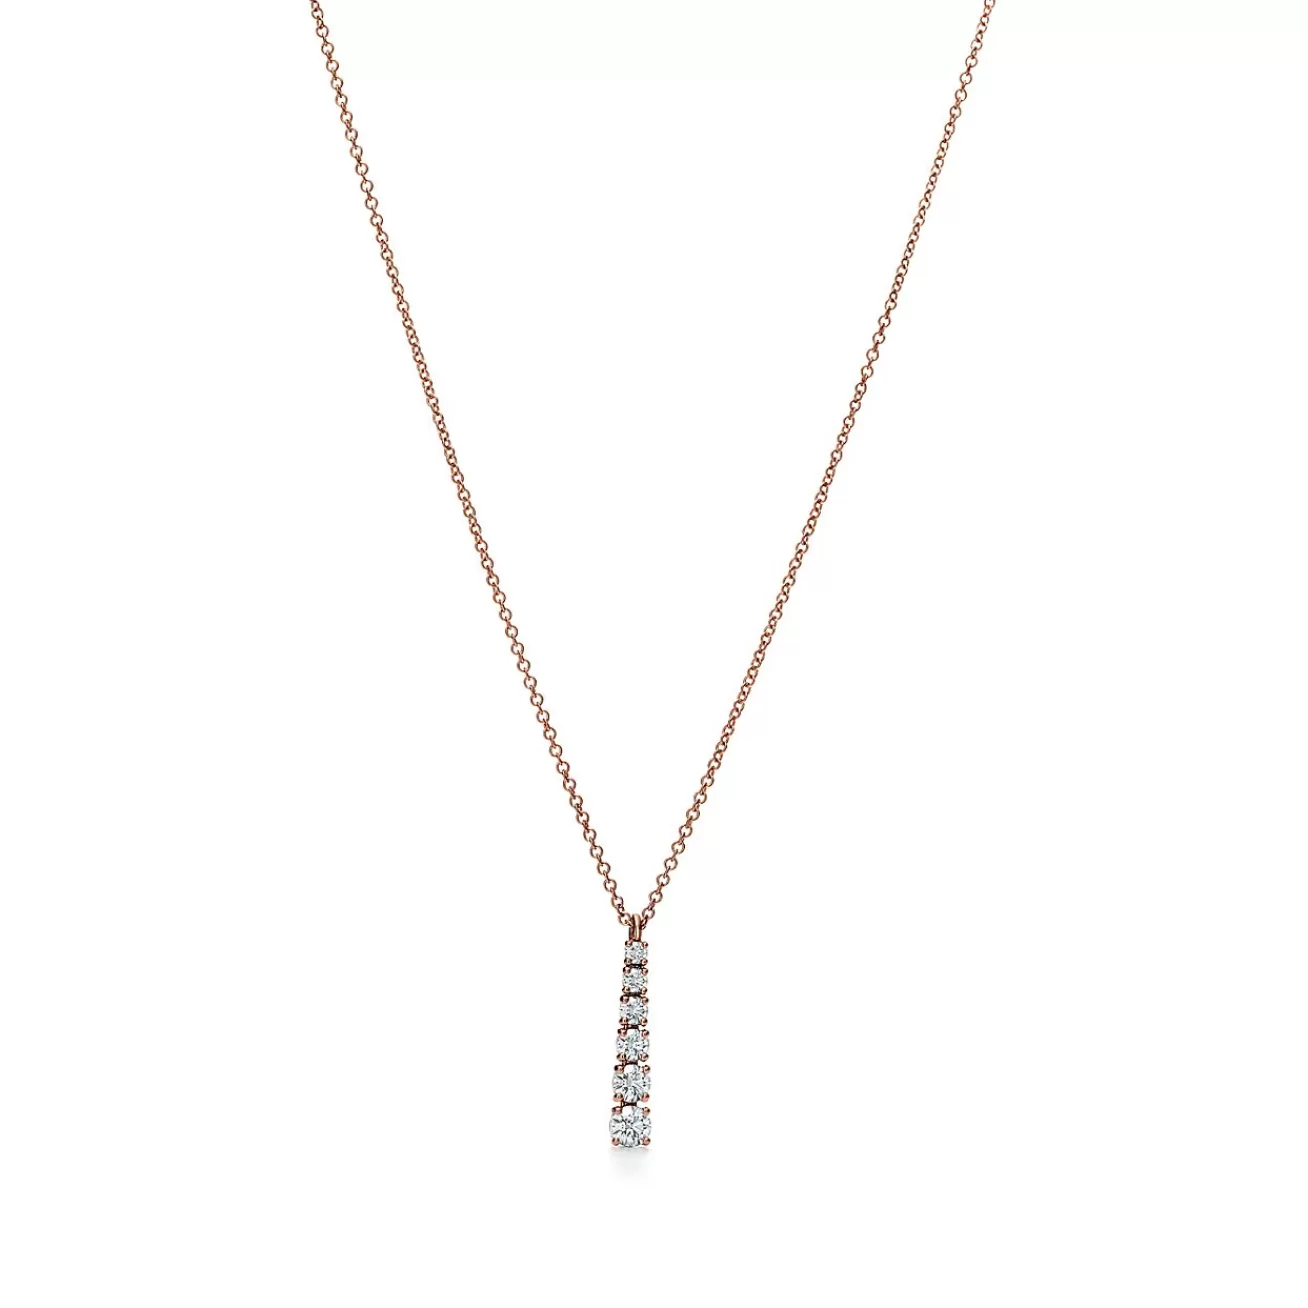 Tiffany & Co. Graduated drop pendant in 18k rose gold with diamonds. | ^ Necklaces & Pendants | Rose Gold Jewelry